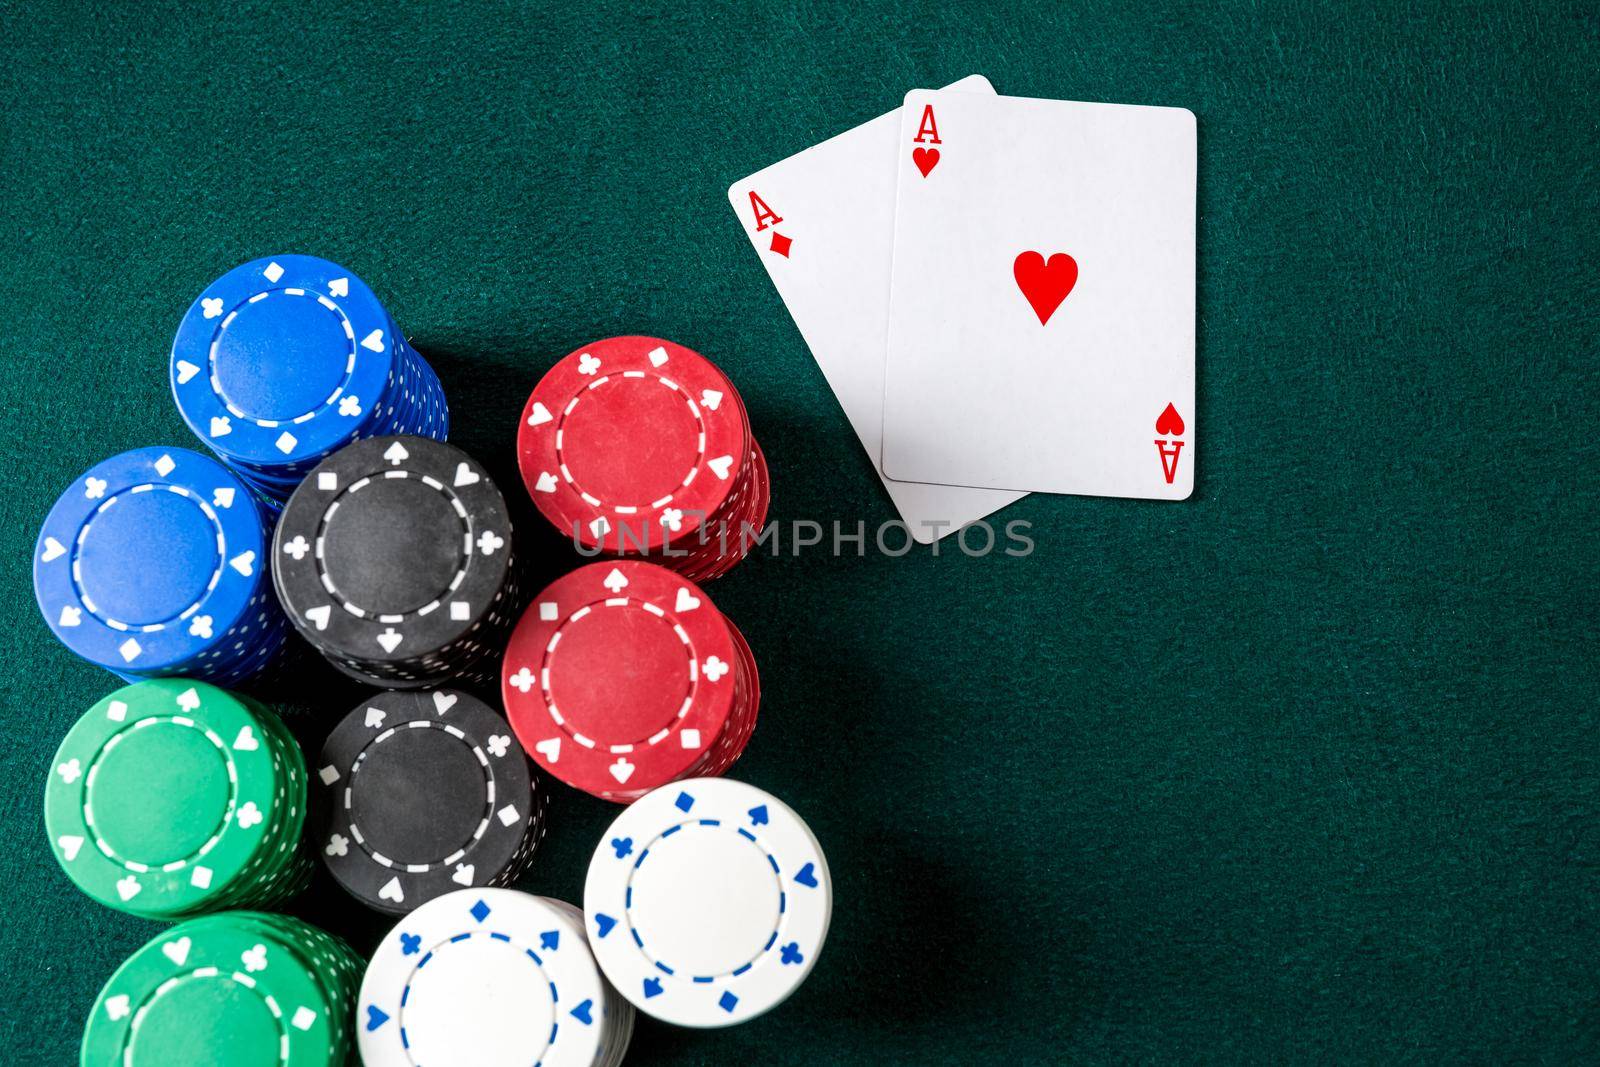 Poker play. Chips and cards on the green table